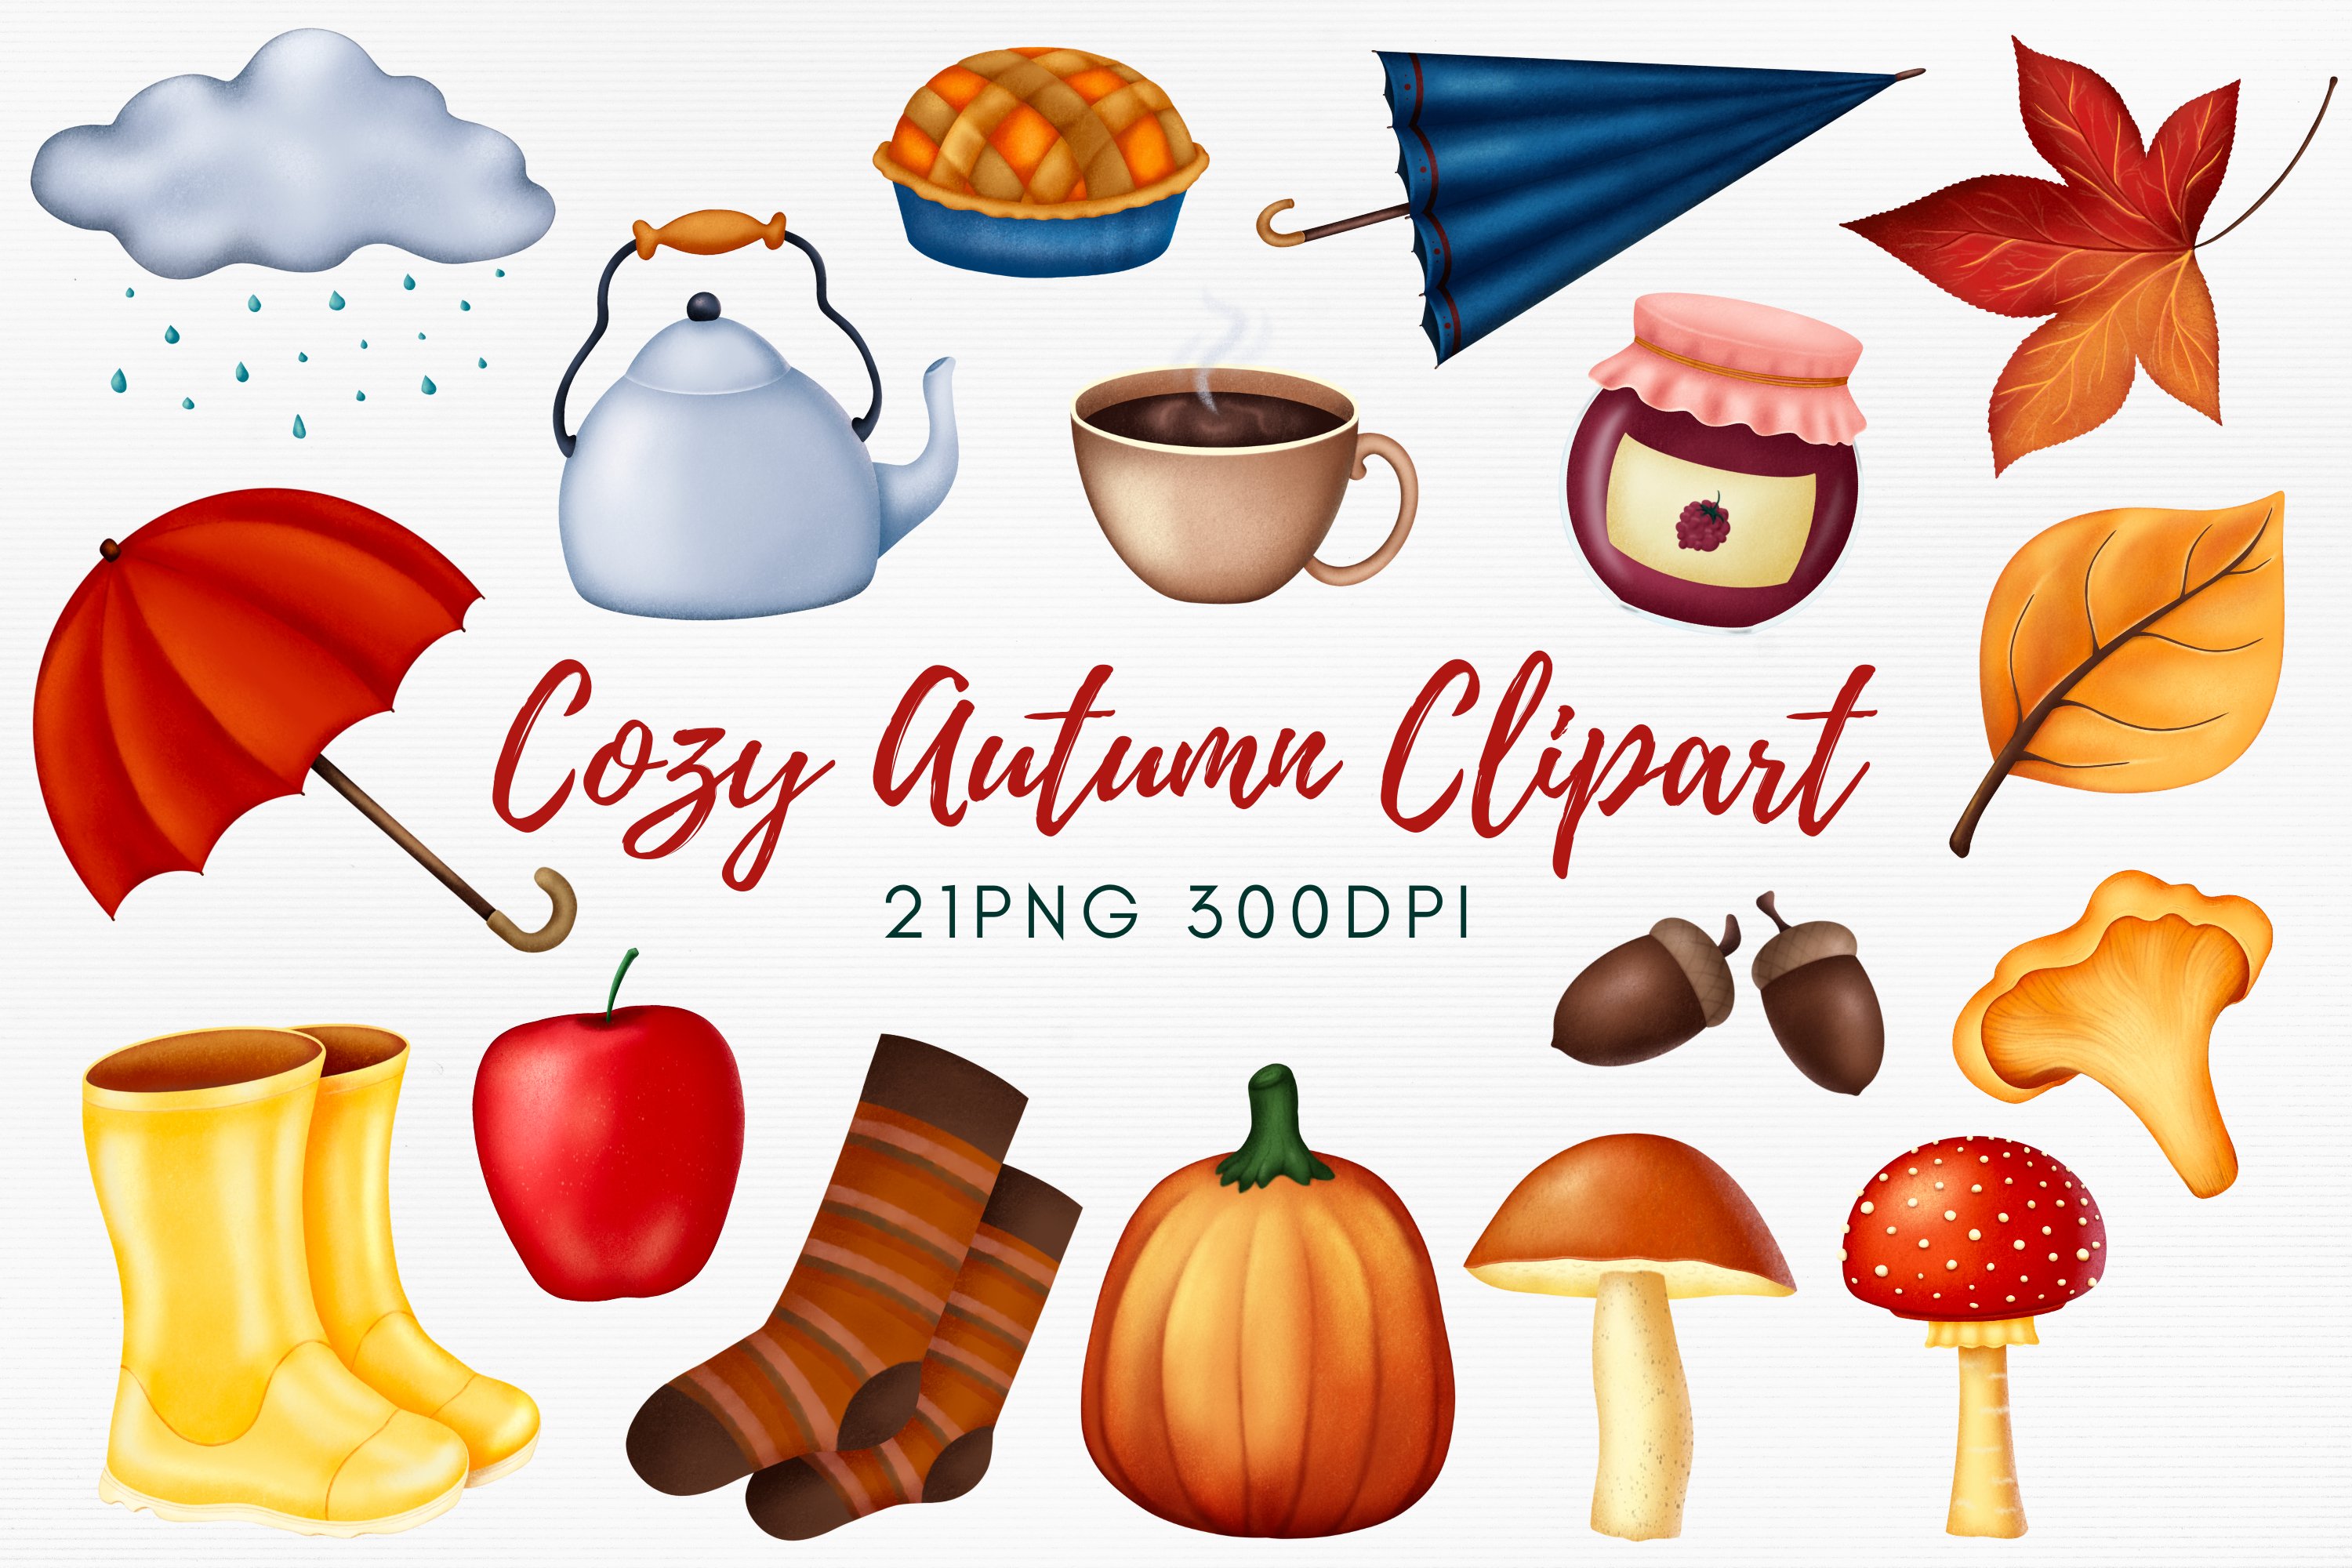 Red lettering "Cozy Autumn Clipart" and different illustrations on a gray background.